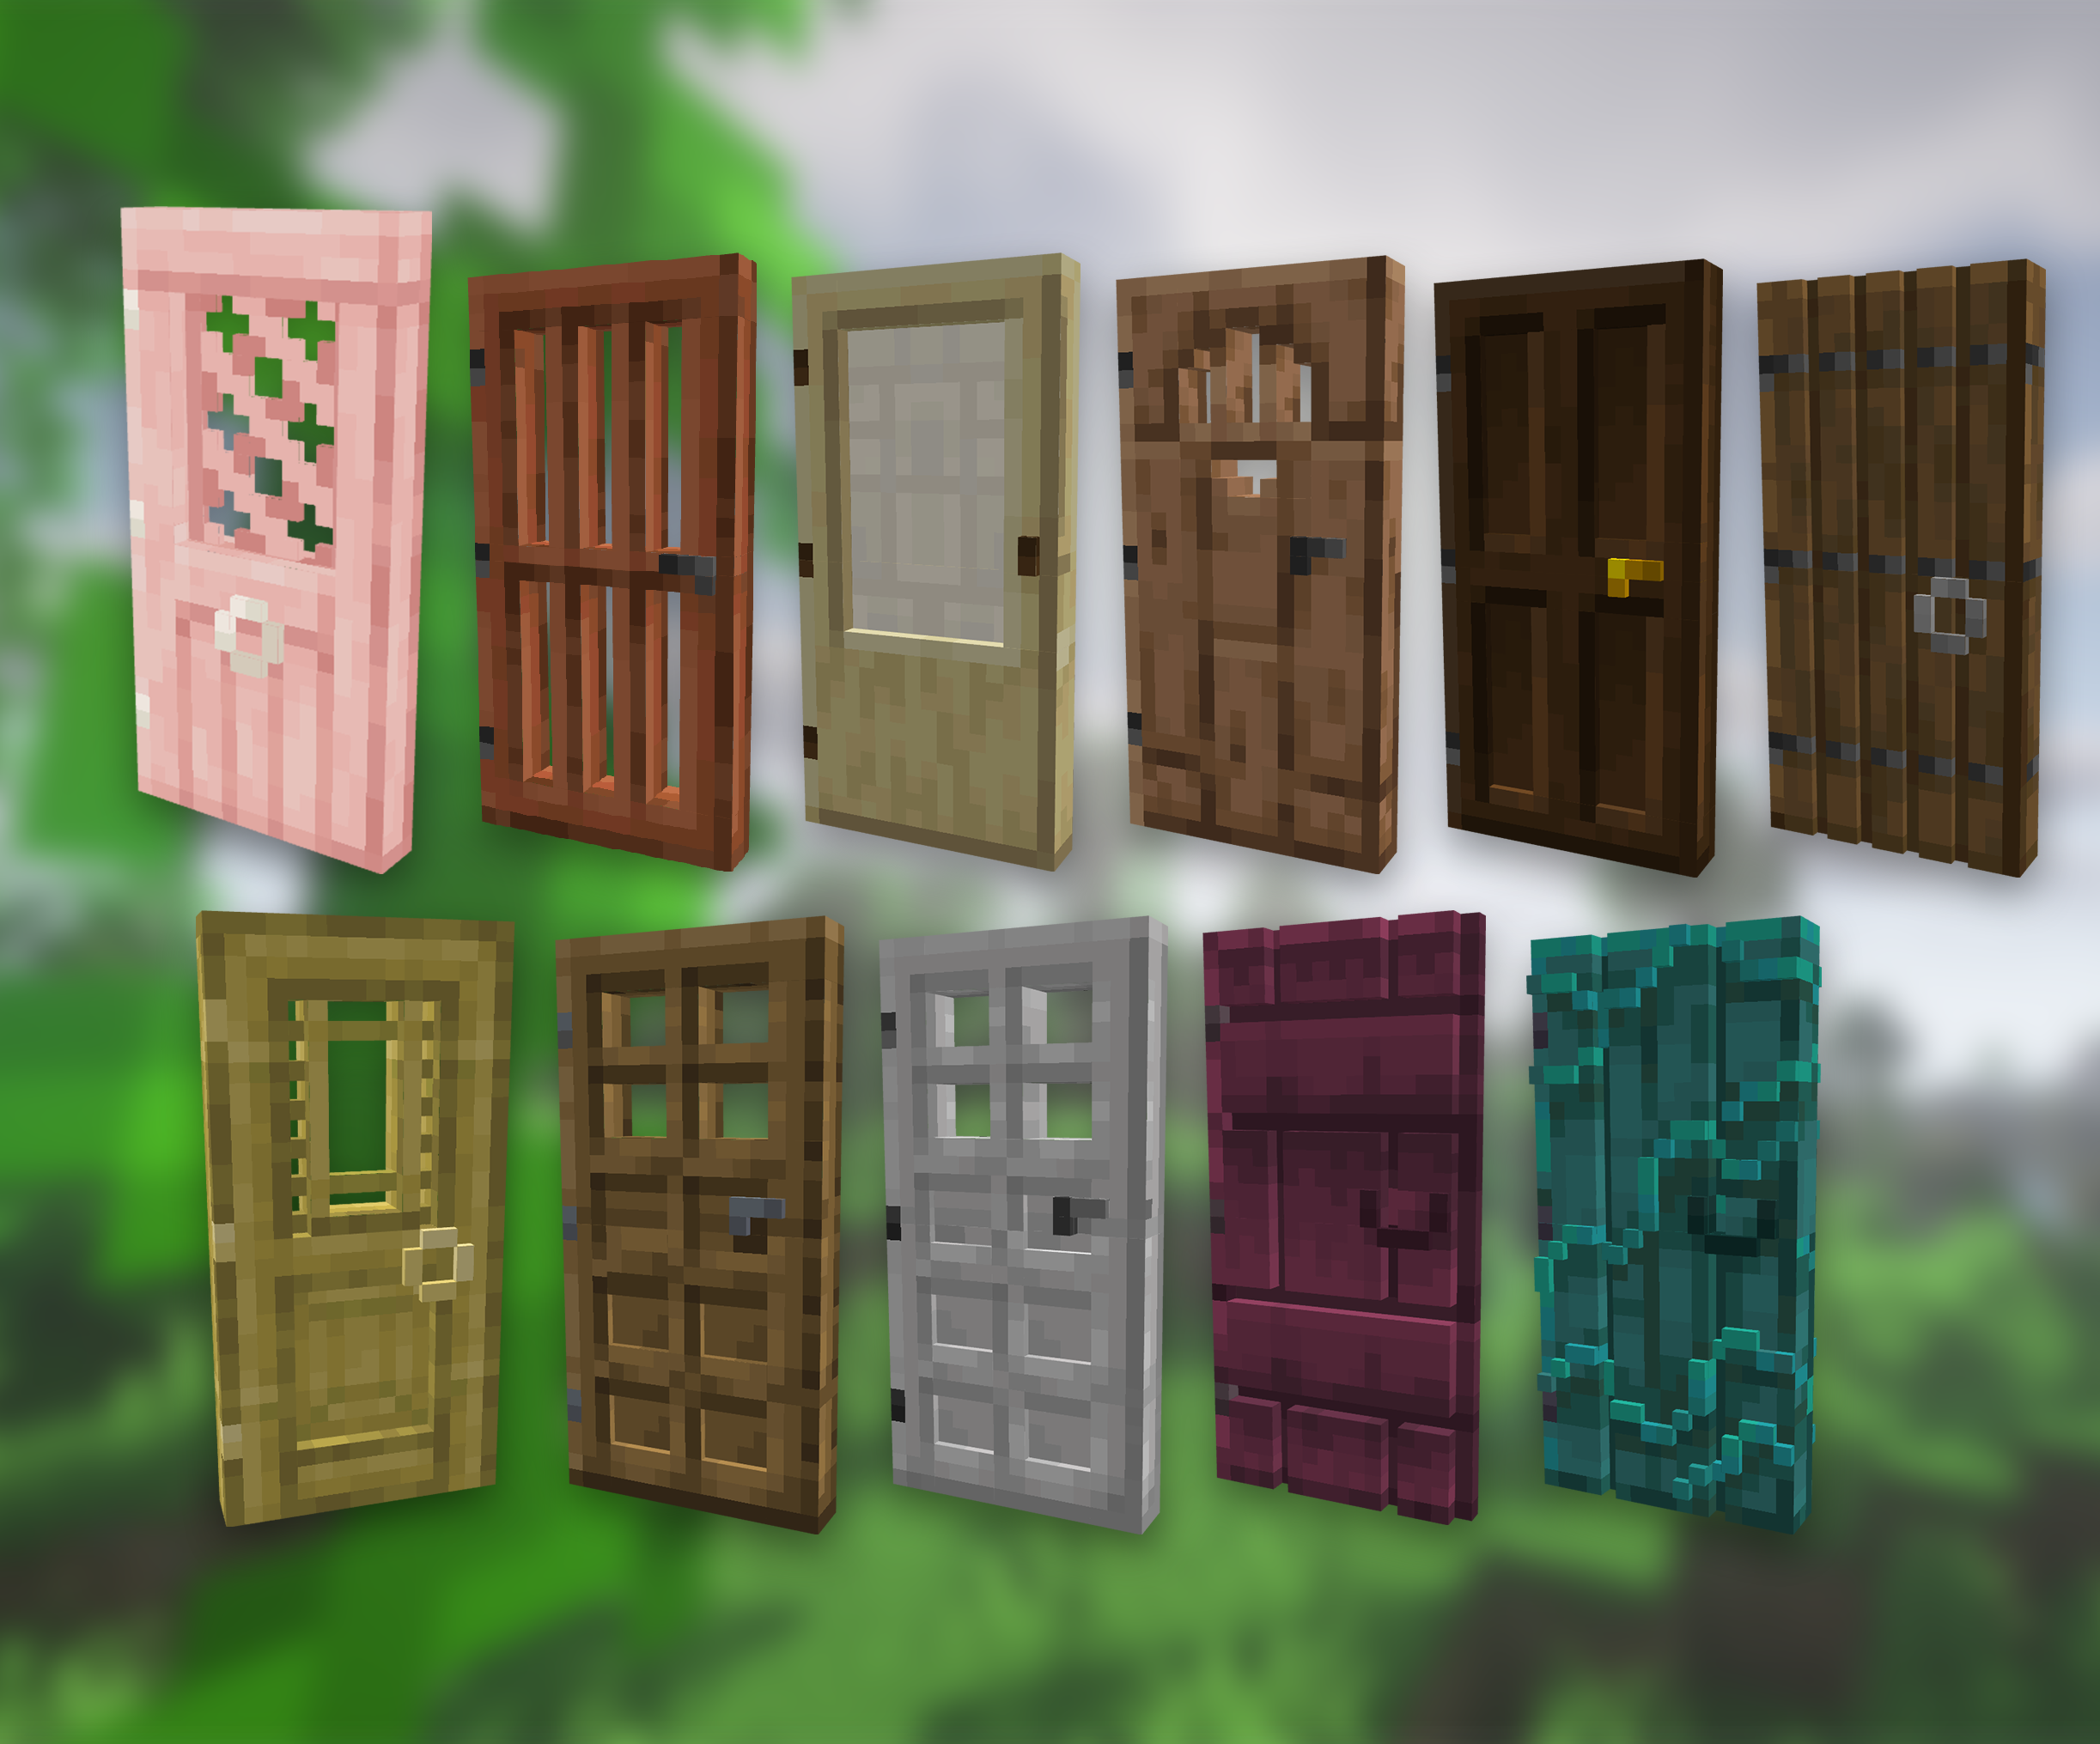 Every door has been remodeled to appear in 3D